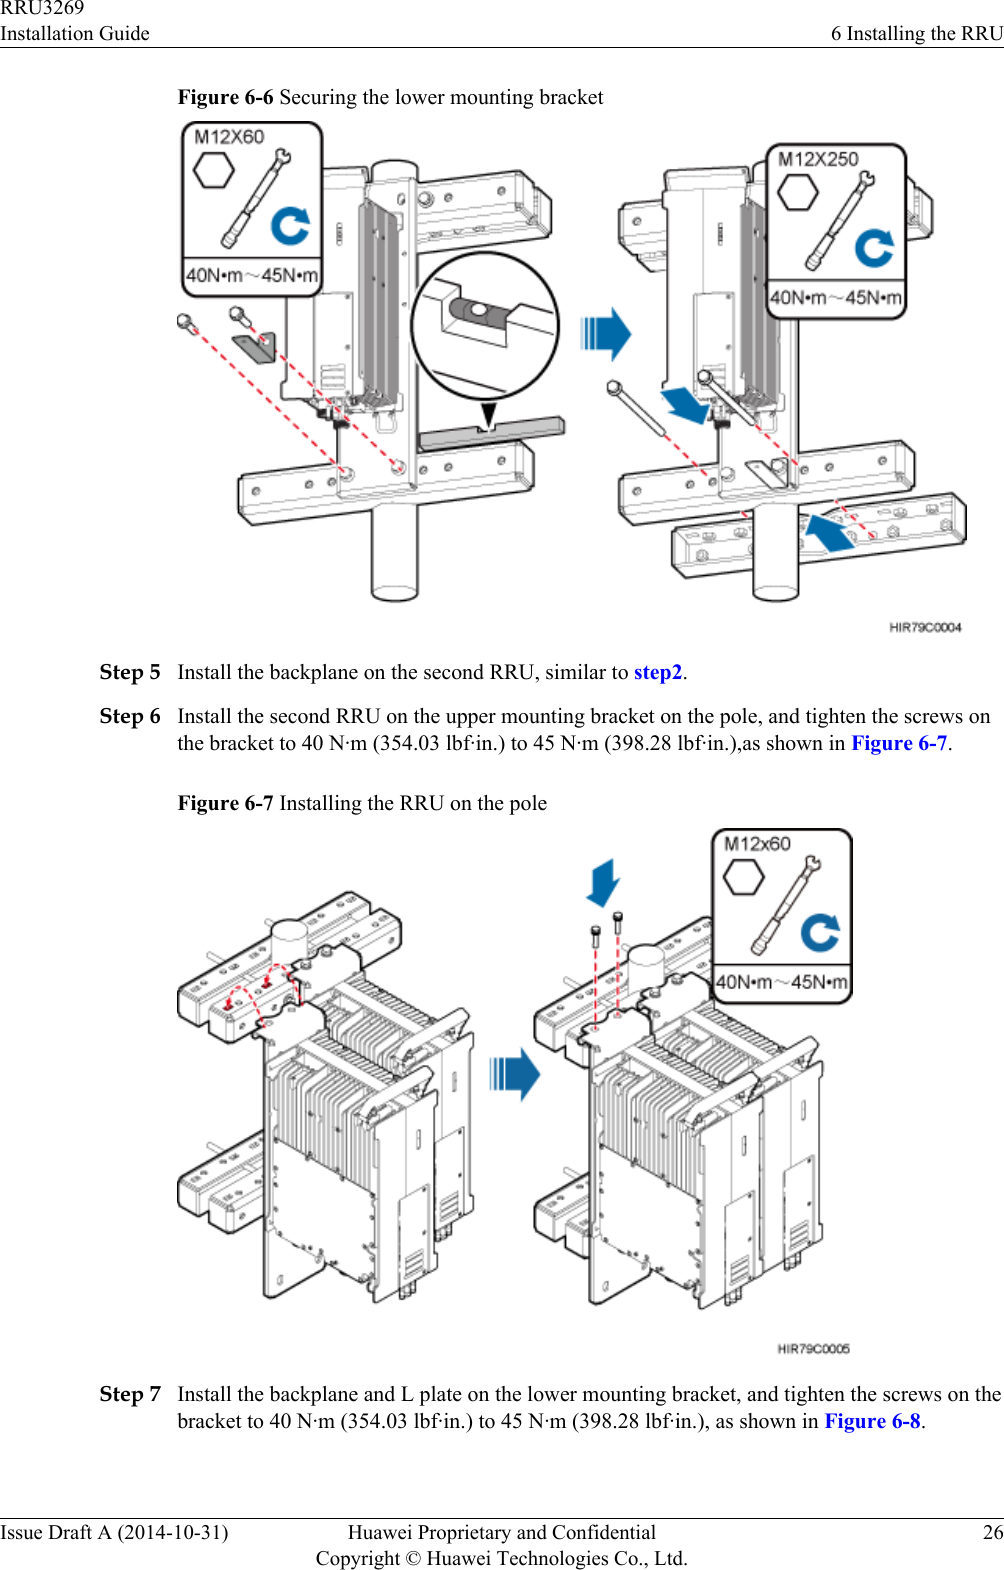 Figure 6-6 Securing the lower mounting bracketStep 5 Install the backplane on the second RRU, similar to step2.Step 6 Install the second RRU on the upper mounting bracket on the pole, and tighten the screws onthe bracket to 40 N·m (354.03 lbf·in.) to 45 N·m (398.28 lbf·in.),as shown in Figure 6-7.Figure 6-7 Installing the RRU on the poleStep 7 Install the backplane and L plate on the lower mounting bracket, and tighten the screws on thebracket to 40 N·m (354.03 lbf·in.) to 45 N·m (398.28 lbf·in.), as shown in Figure 6-8.RRU3269Installation Guide 6 Installing the RRUIssue Draft A (2014-10-31) Huawei Proprietary and ConfidentialCopyright © Huawei Technologies Co., Ltd.26